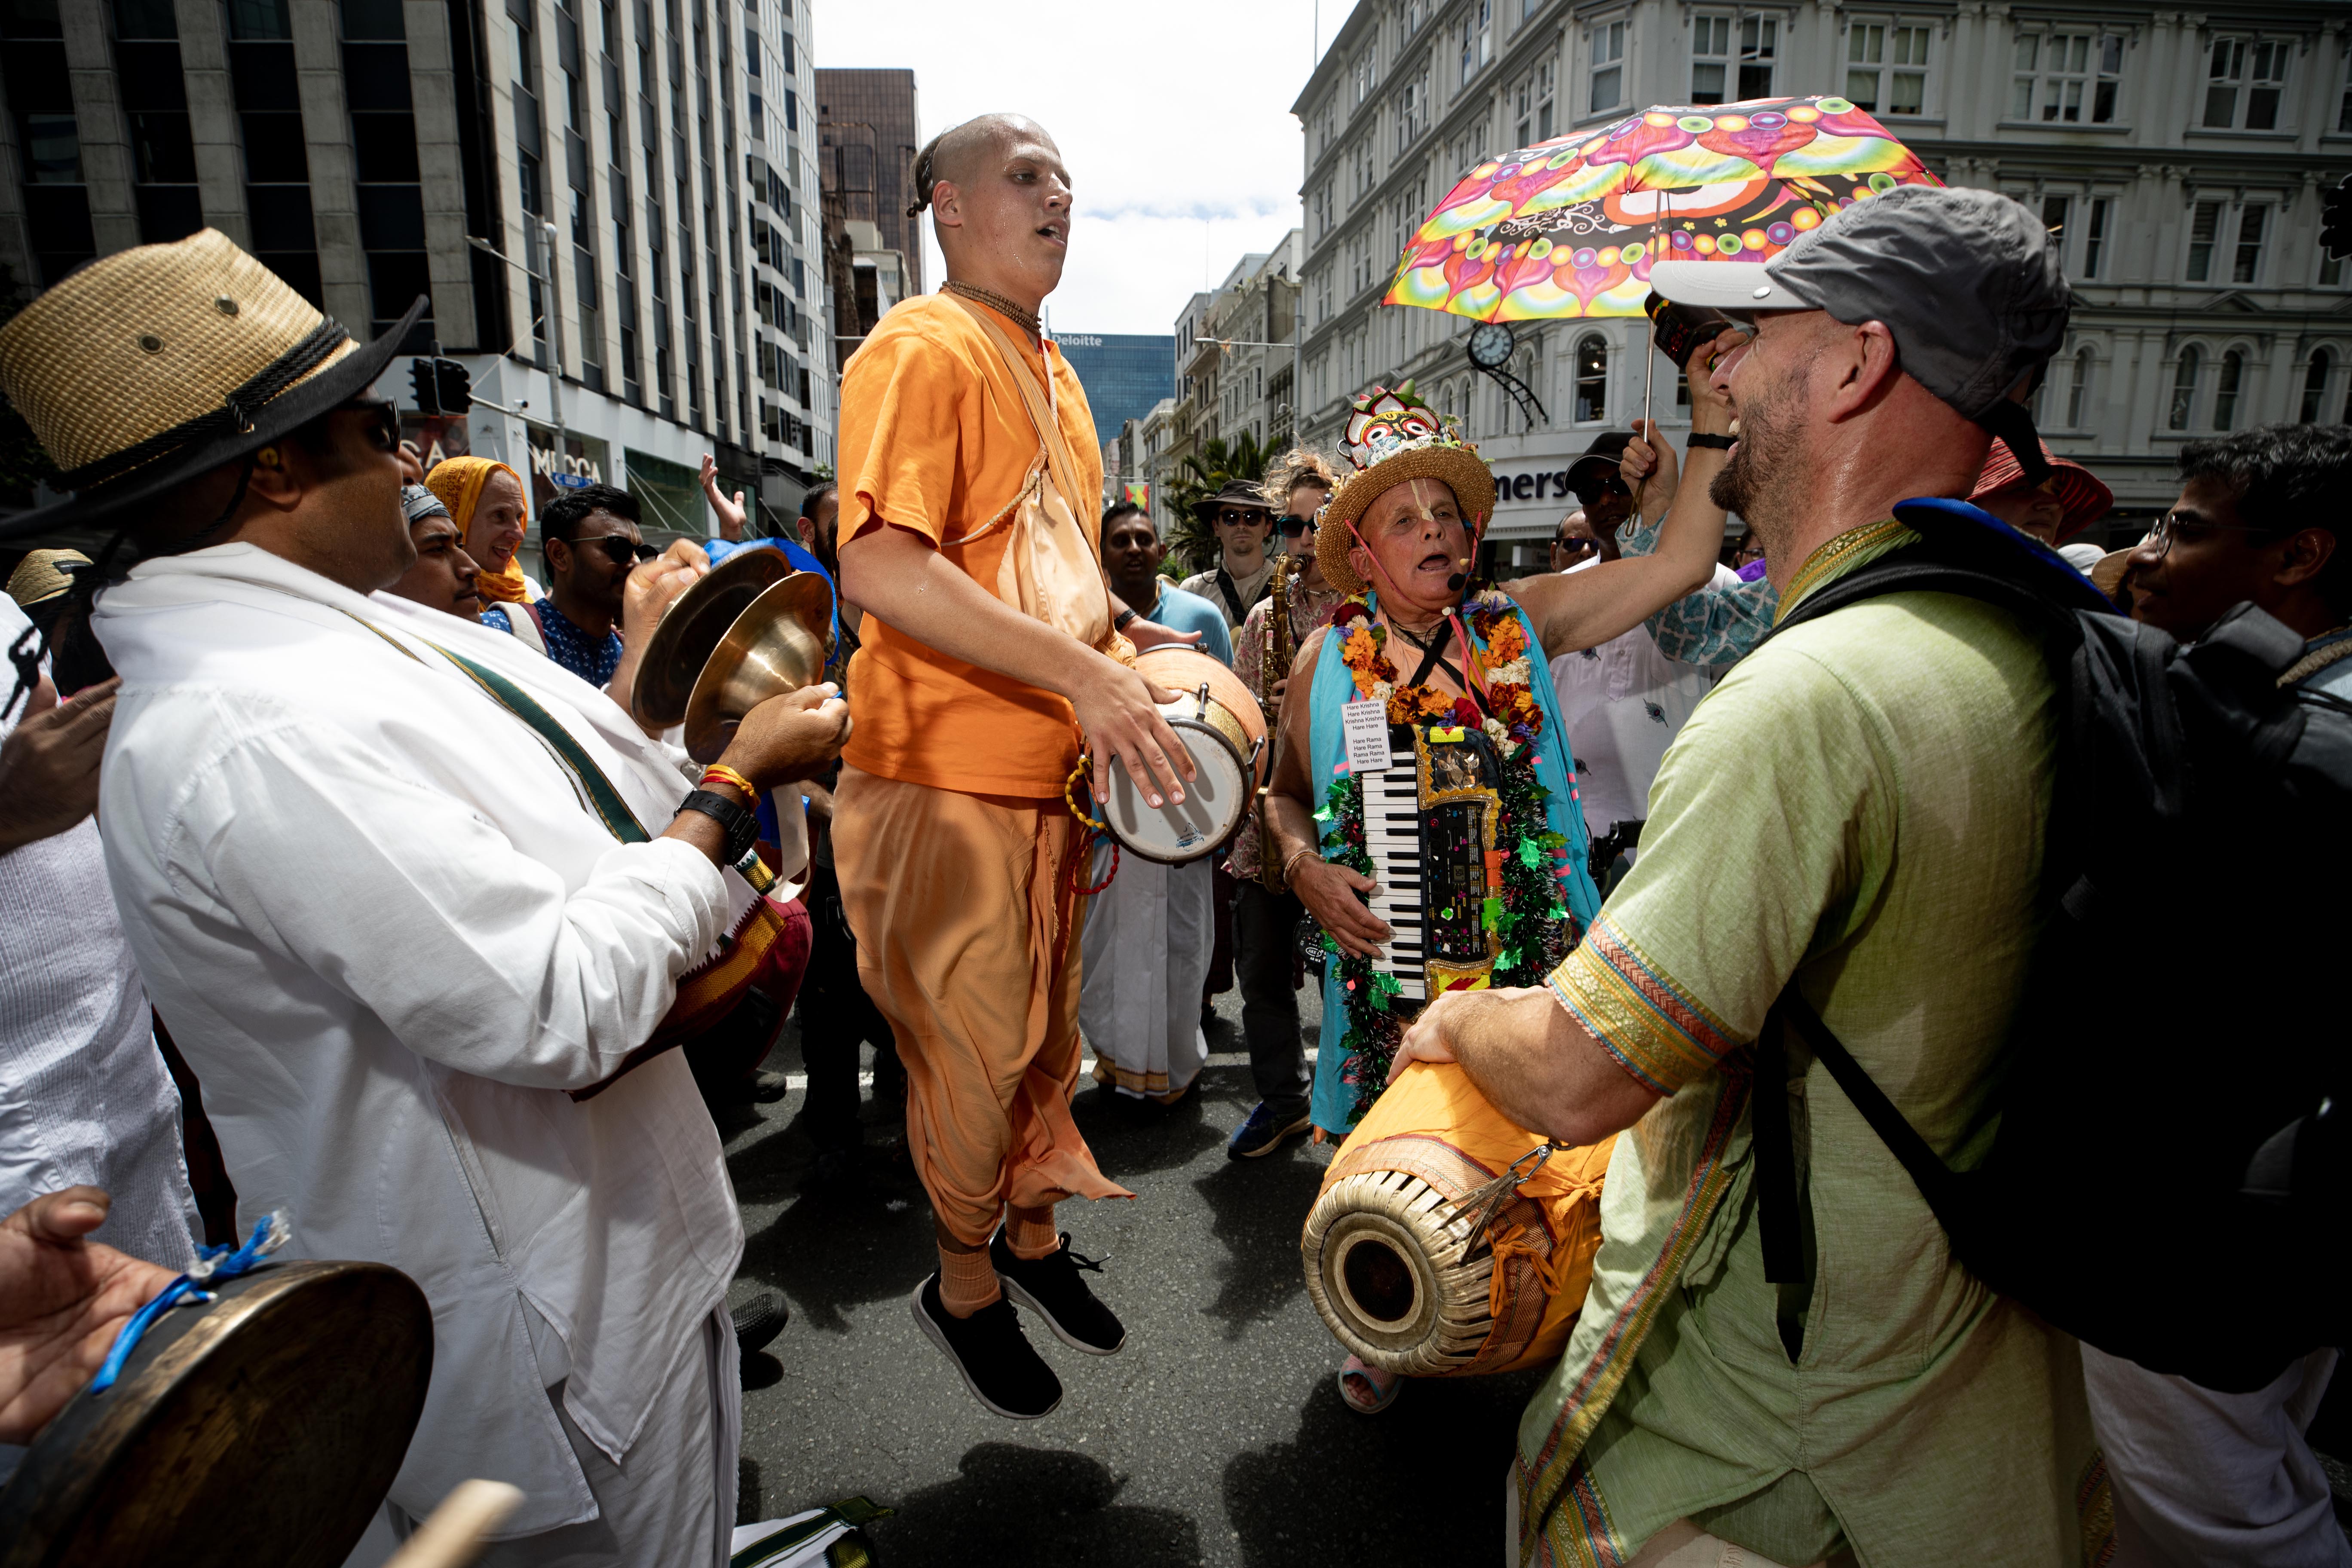 The Auckland Hare Krishna community gather on Queen Street, Auckland City to celebrate Ratha Yatra, which involves a grand chariot procession of Lord Jagannatha, Baladeva, and Subhadra. This vibrant street festival exemplifies unity, and the Divine's journey touches hearts along the way.  By Dean Purcell - NZ Herald photographer